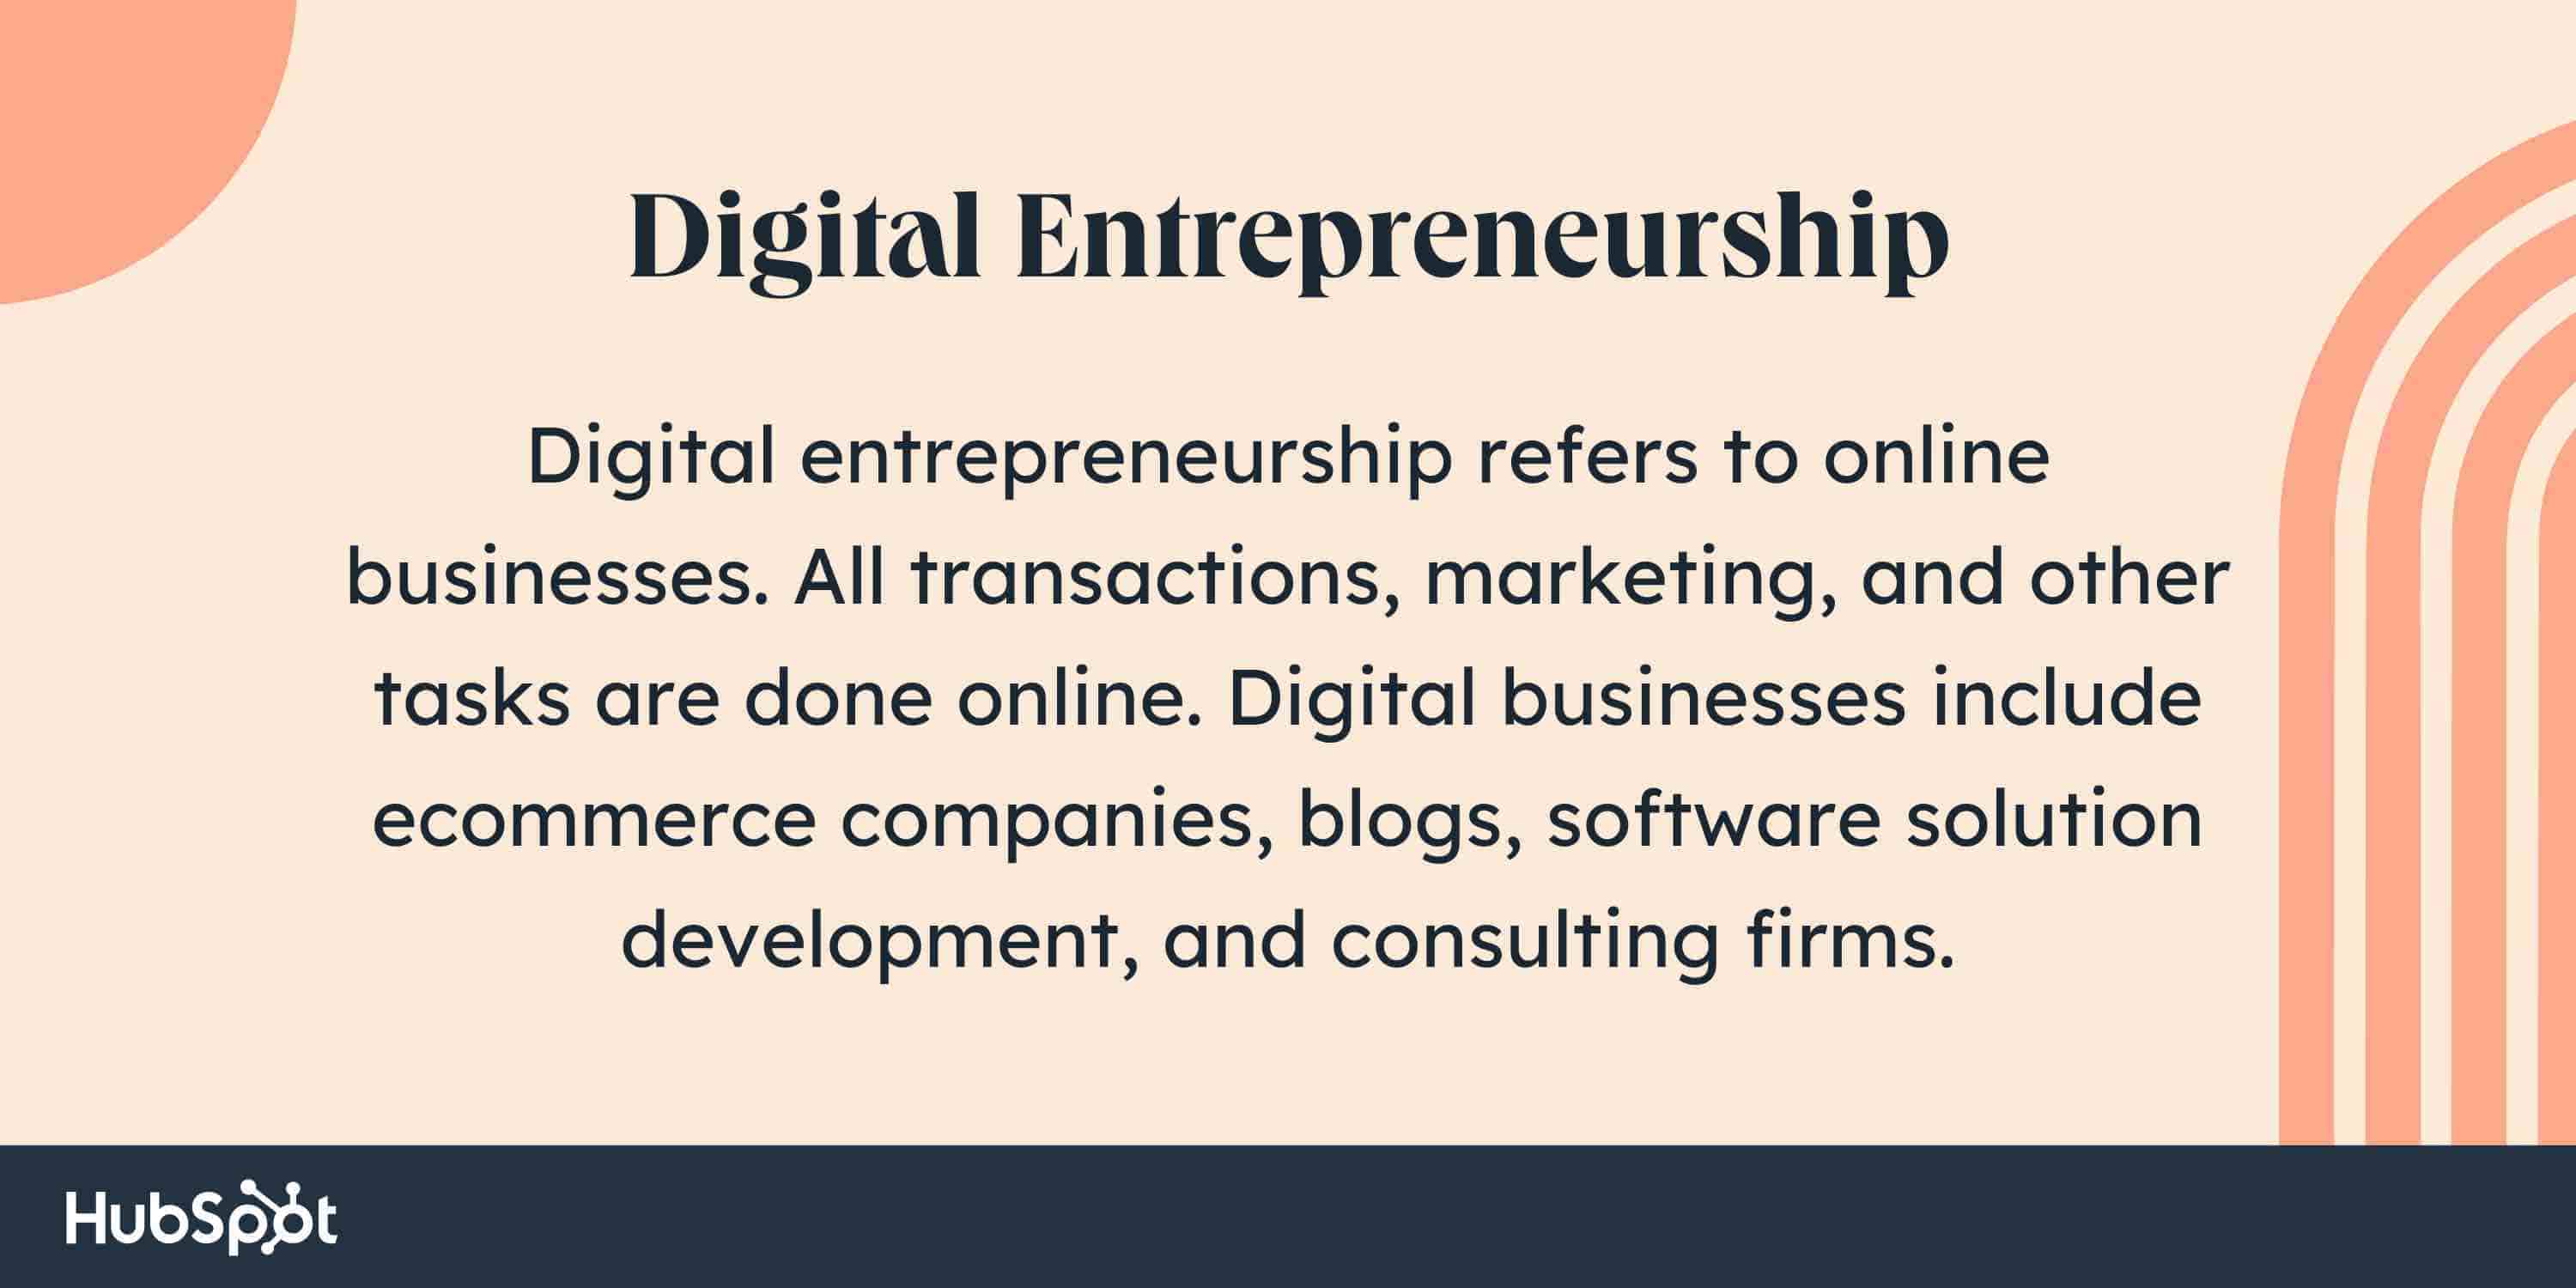 What is digital entrepreneurship? Digital entrepreneurship refers to online businesses. All transactions, marketing, and other tasks are done online. Digital businesses include ecommerce companies, blogs, software solution development, and consulting firms.